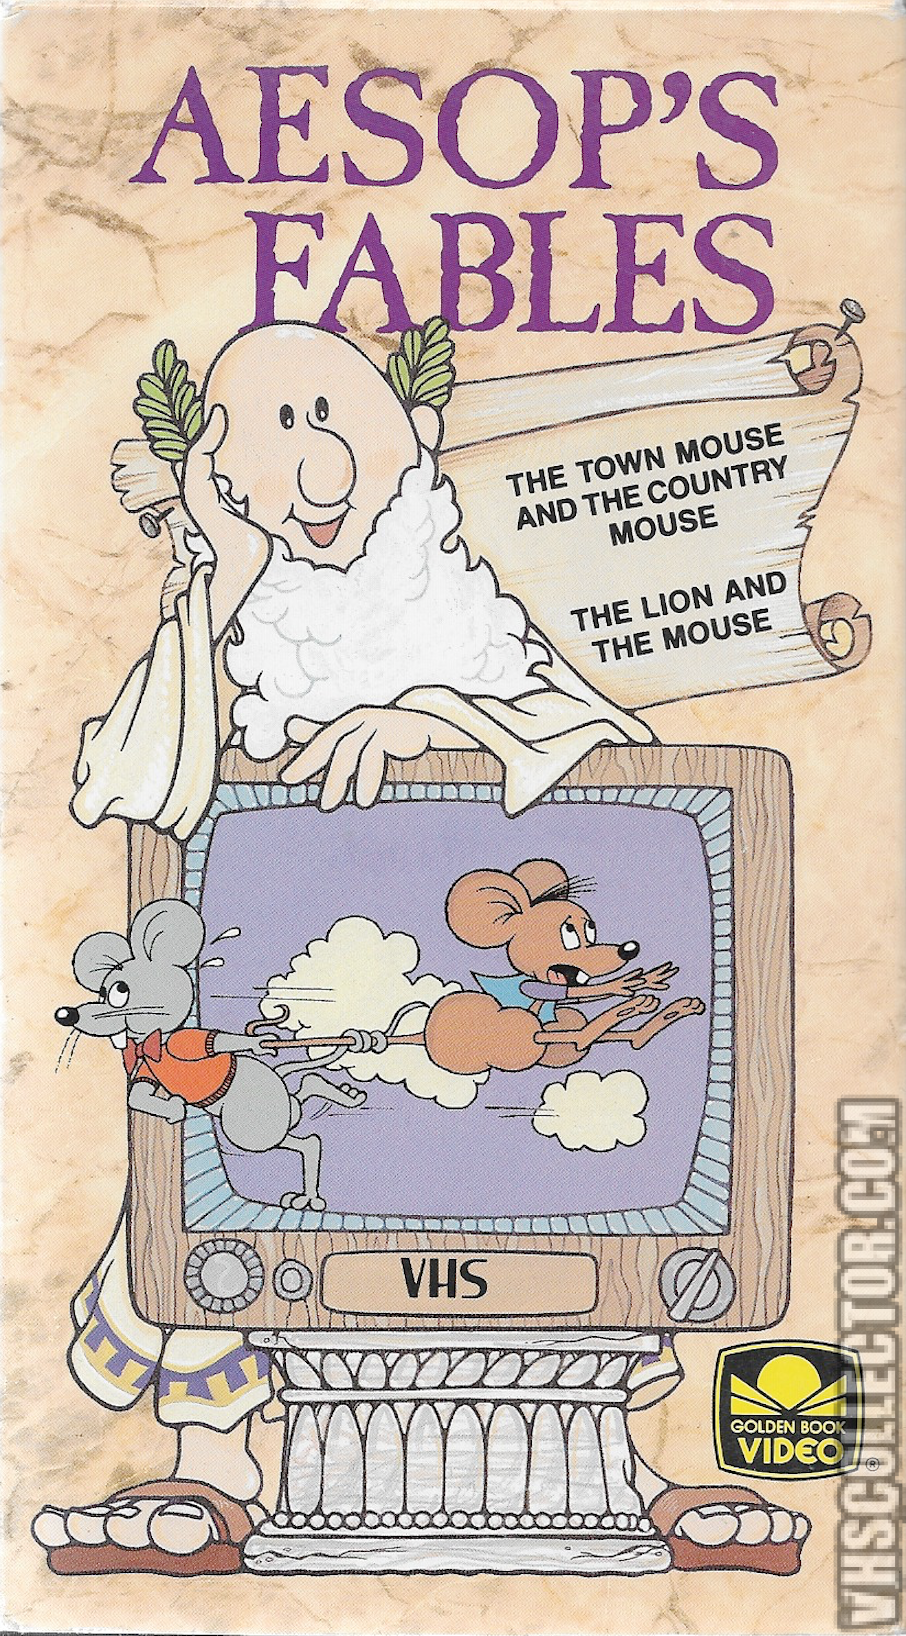 aesop-s-fables-the-town-mouse-and-the-country-mouse-the-lion-and-the